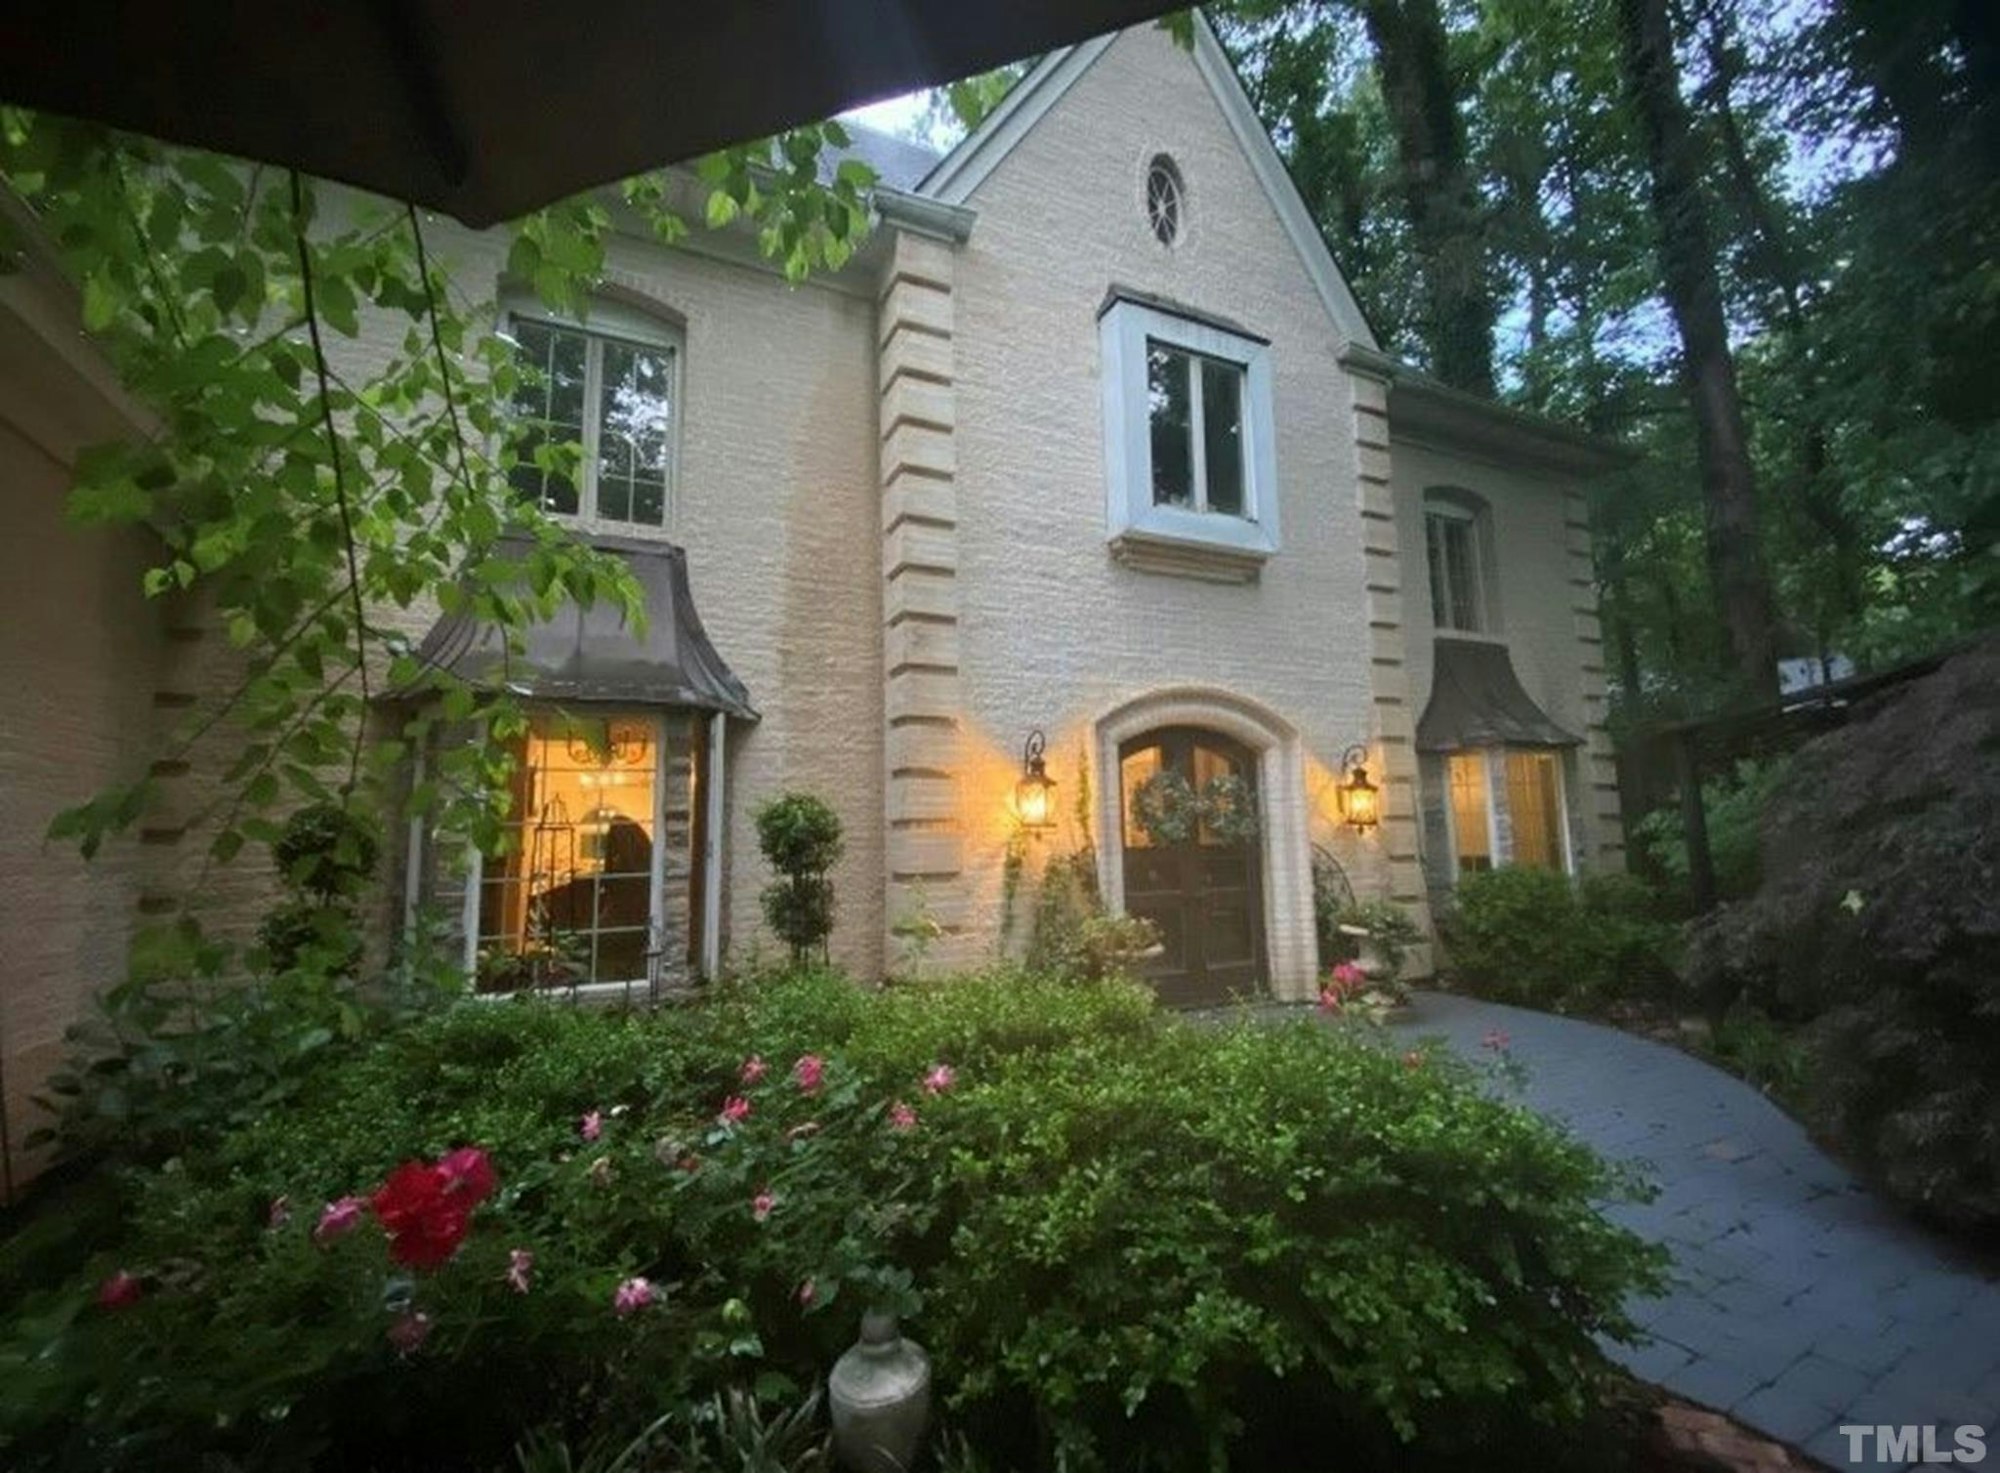 Photo 1 of 49 - 1204 Queensferry Rd, Cary, NC 27511